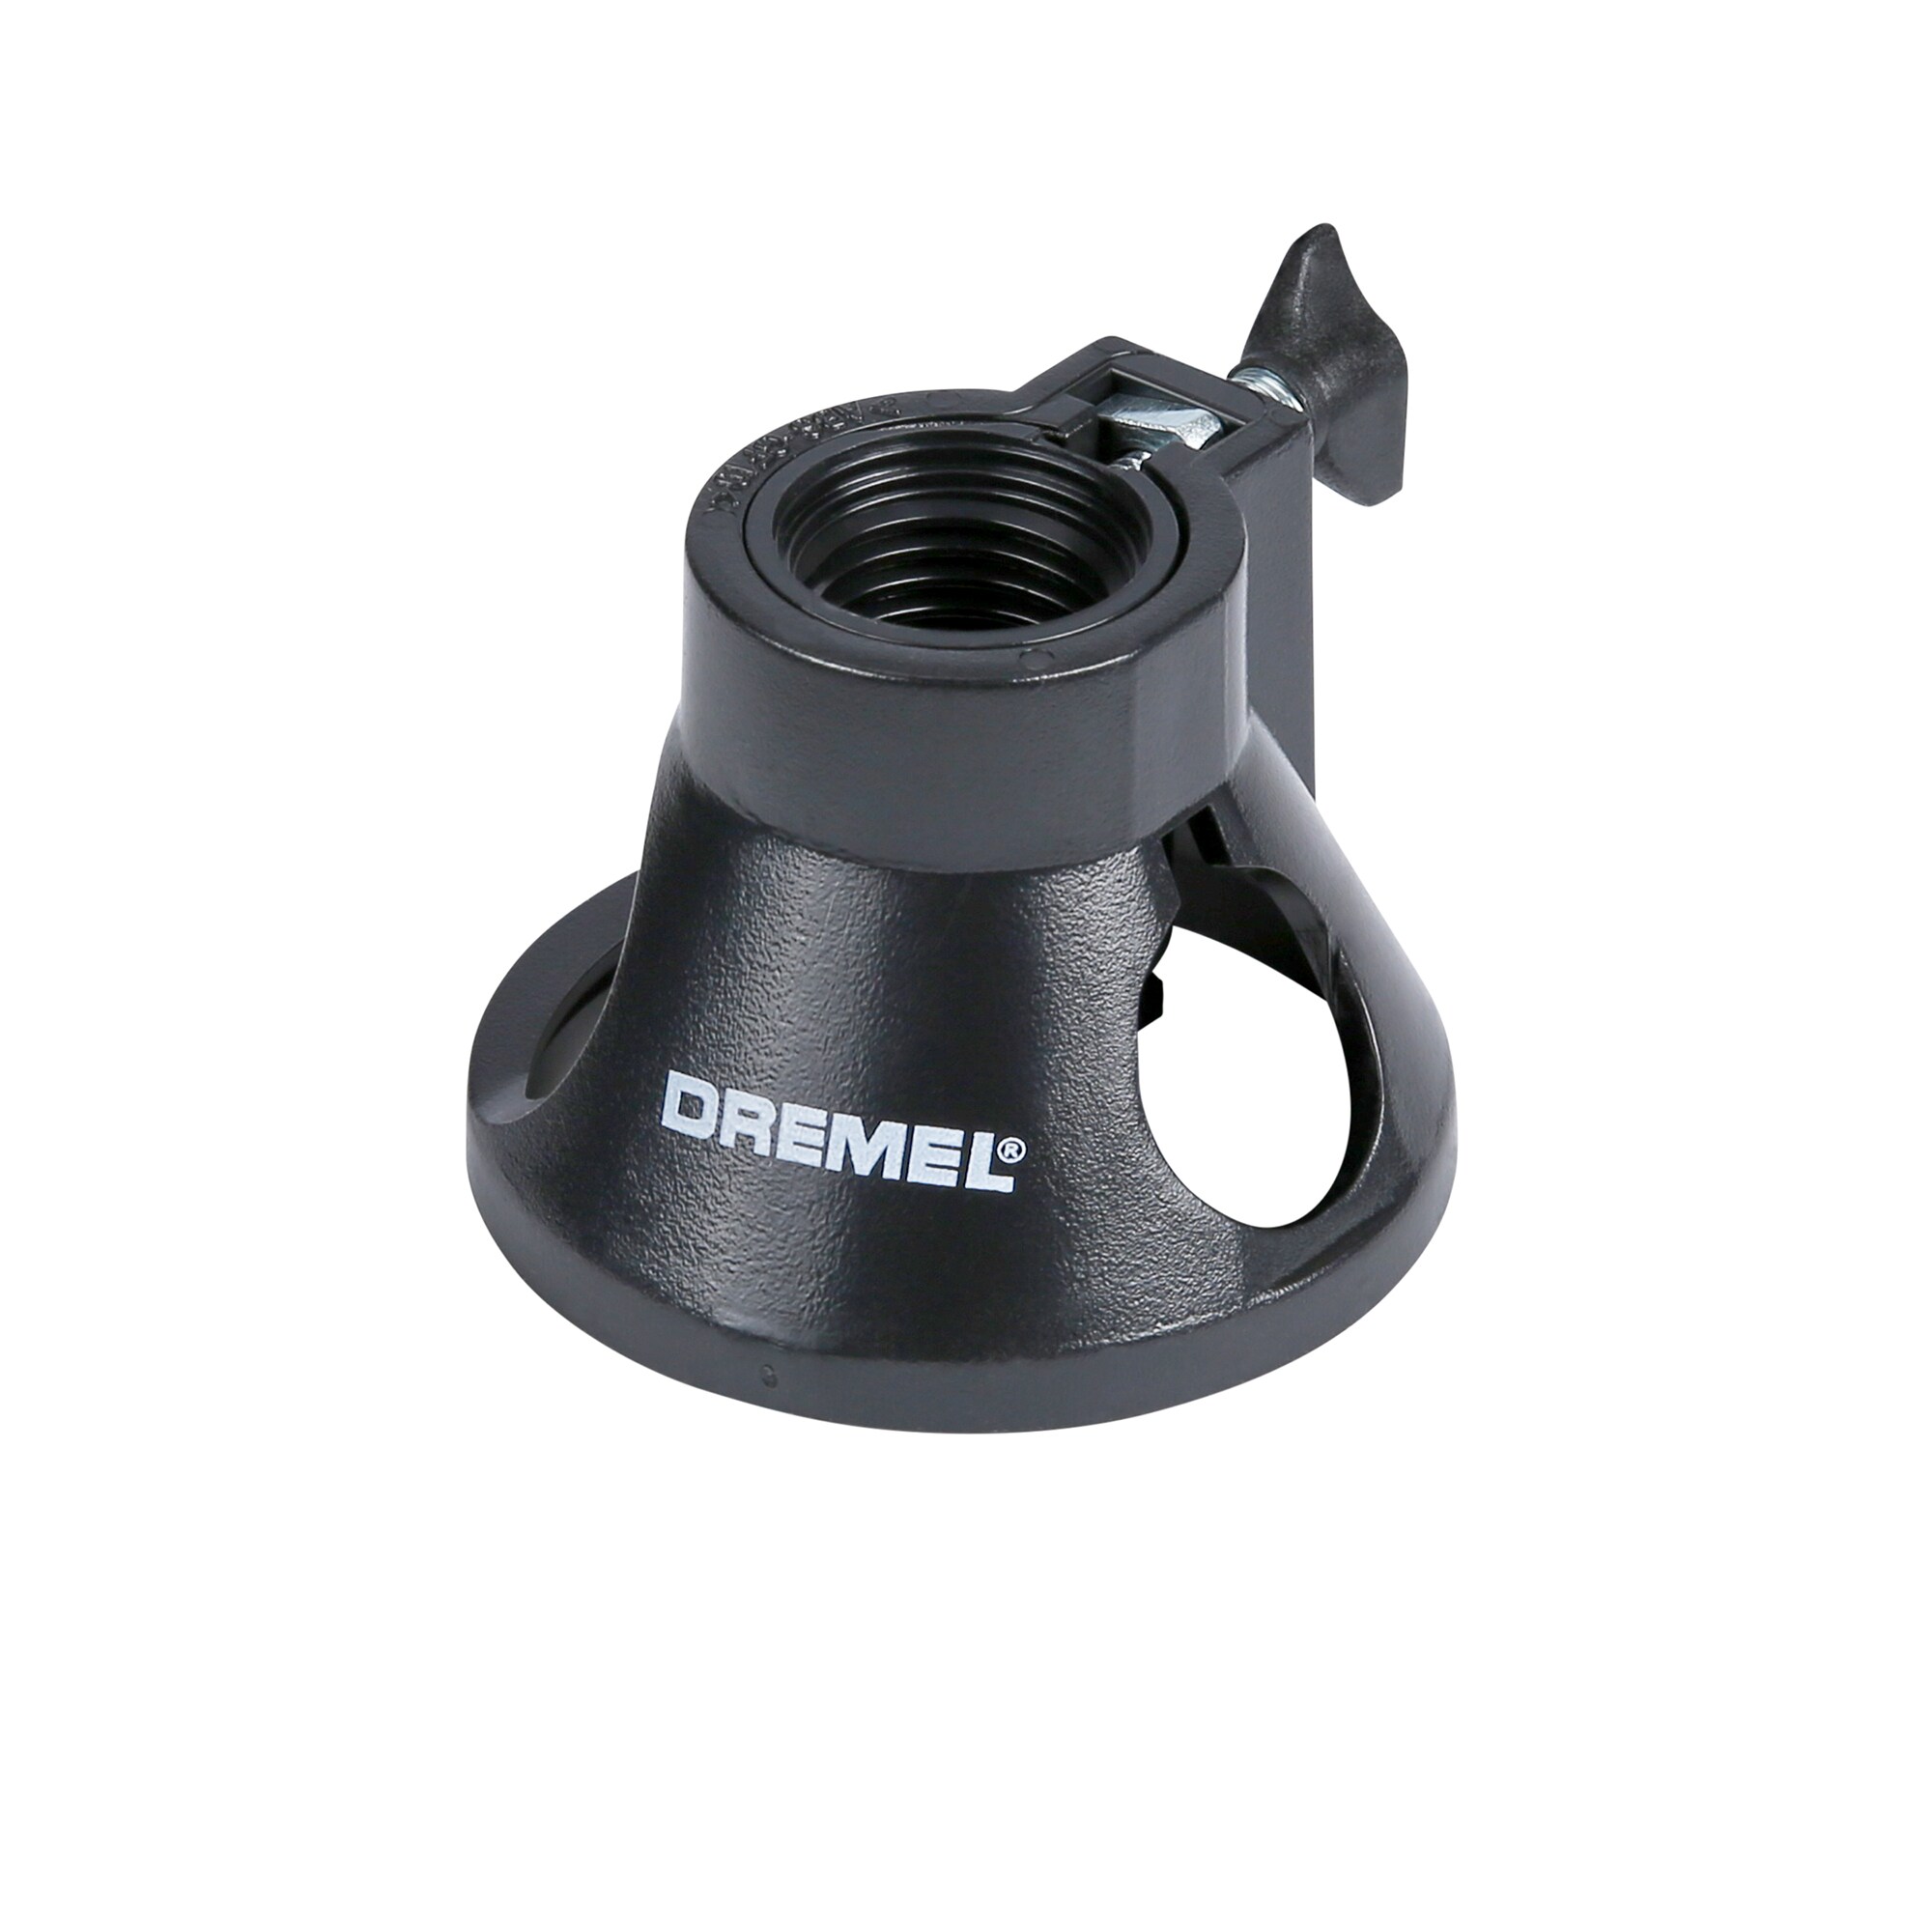 Dremel 565 Multipurpose Cutting Kit with Rotary Tool Screw-On Mounting System